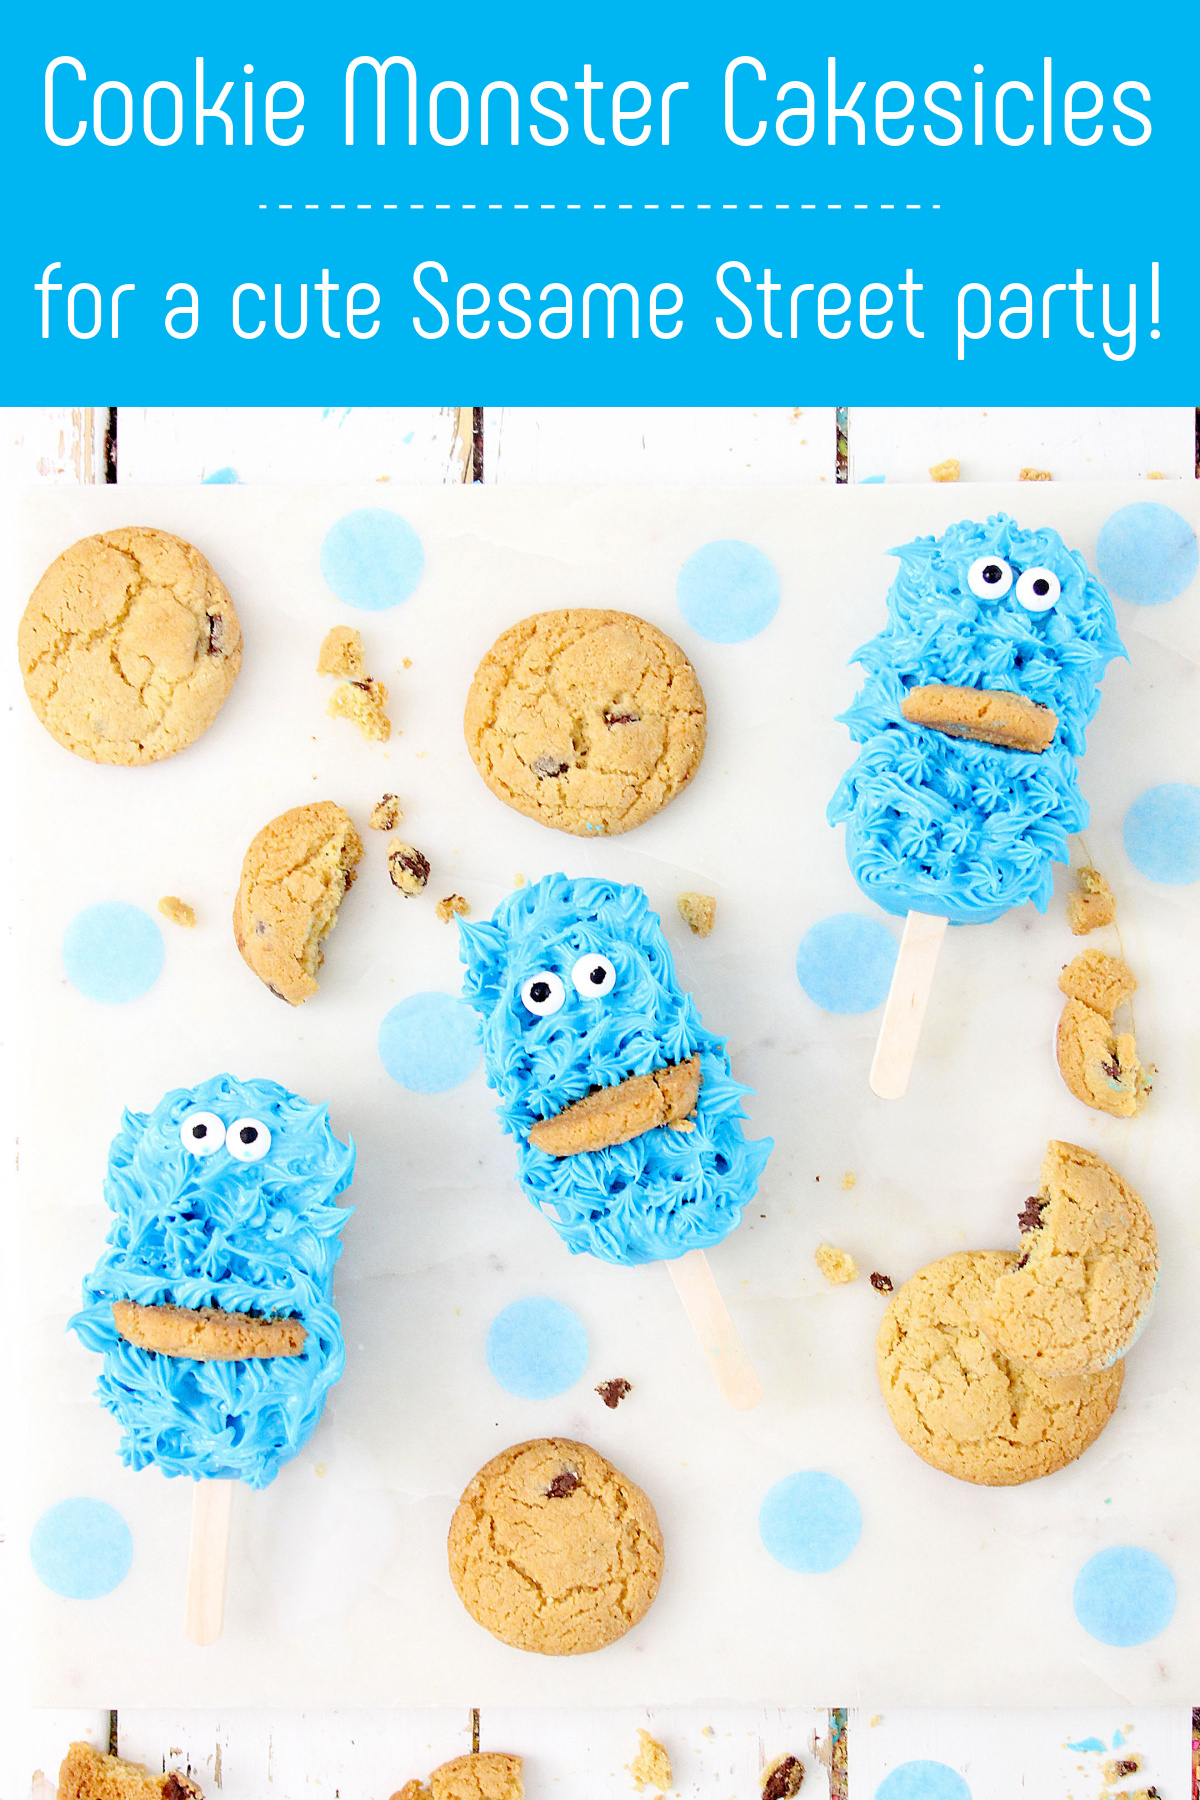 Cookie Monster Cakesicles